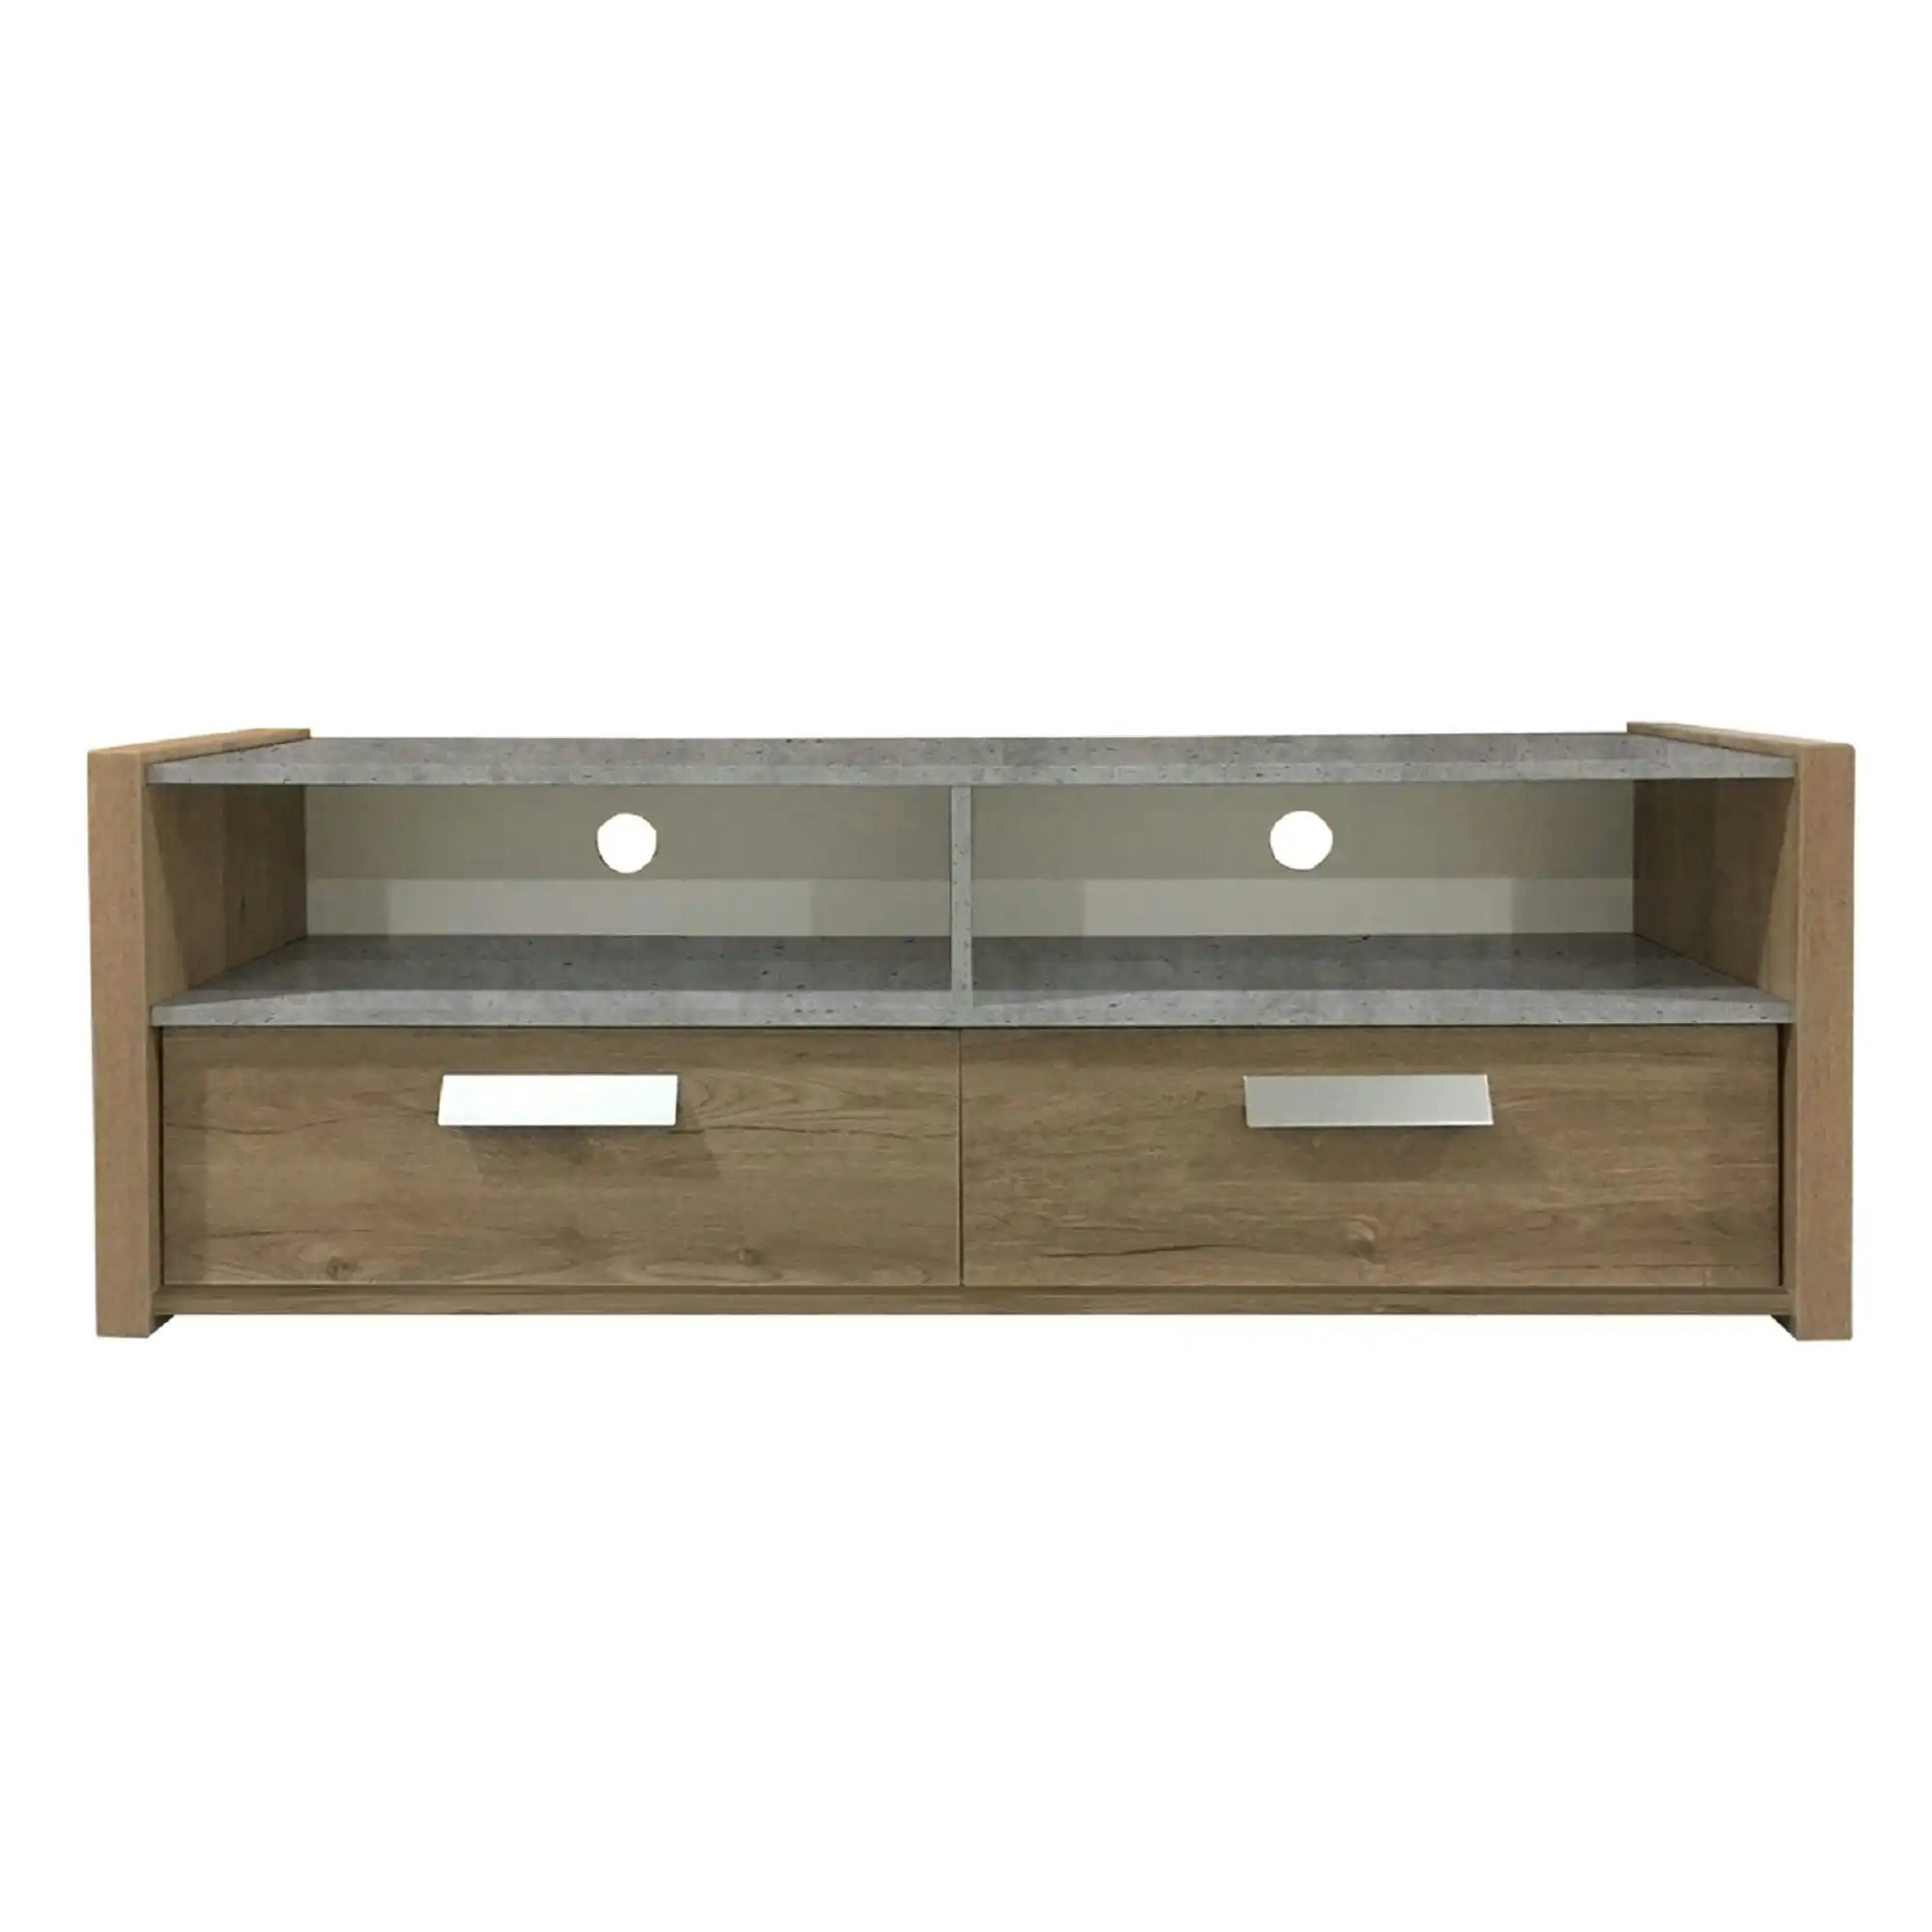 Simon TV Stand -HS9057- FIRST DRAWER: DARK OAK#407109, OTHERS: CEMENT#1107-11